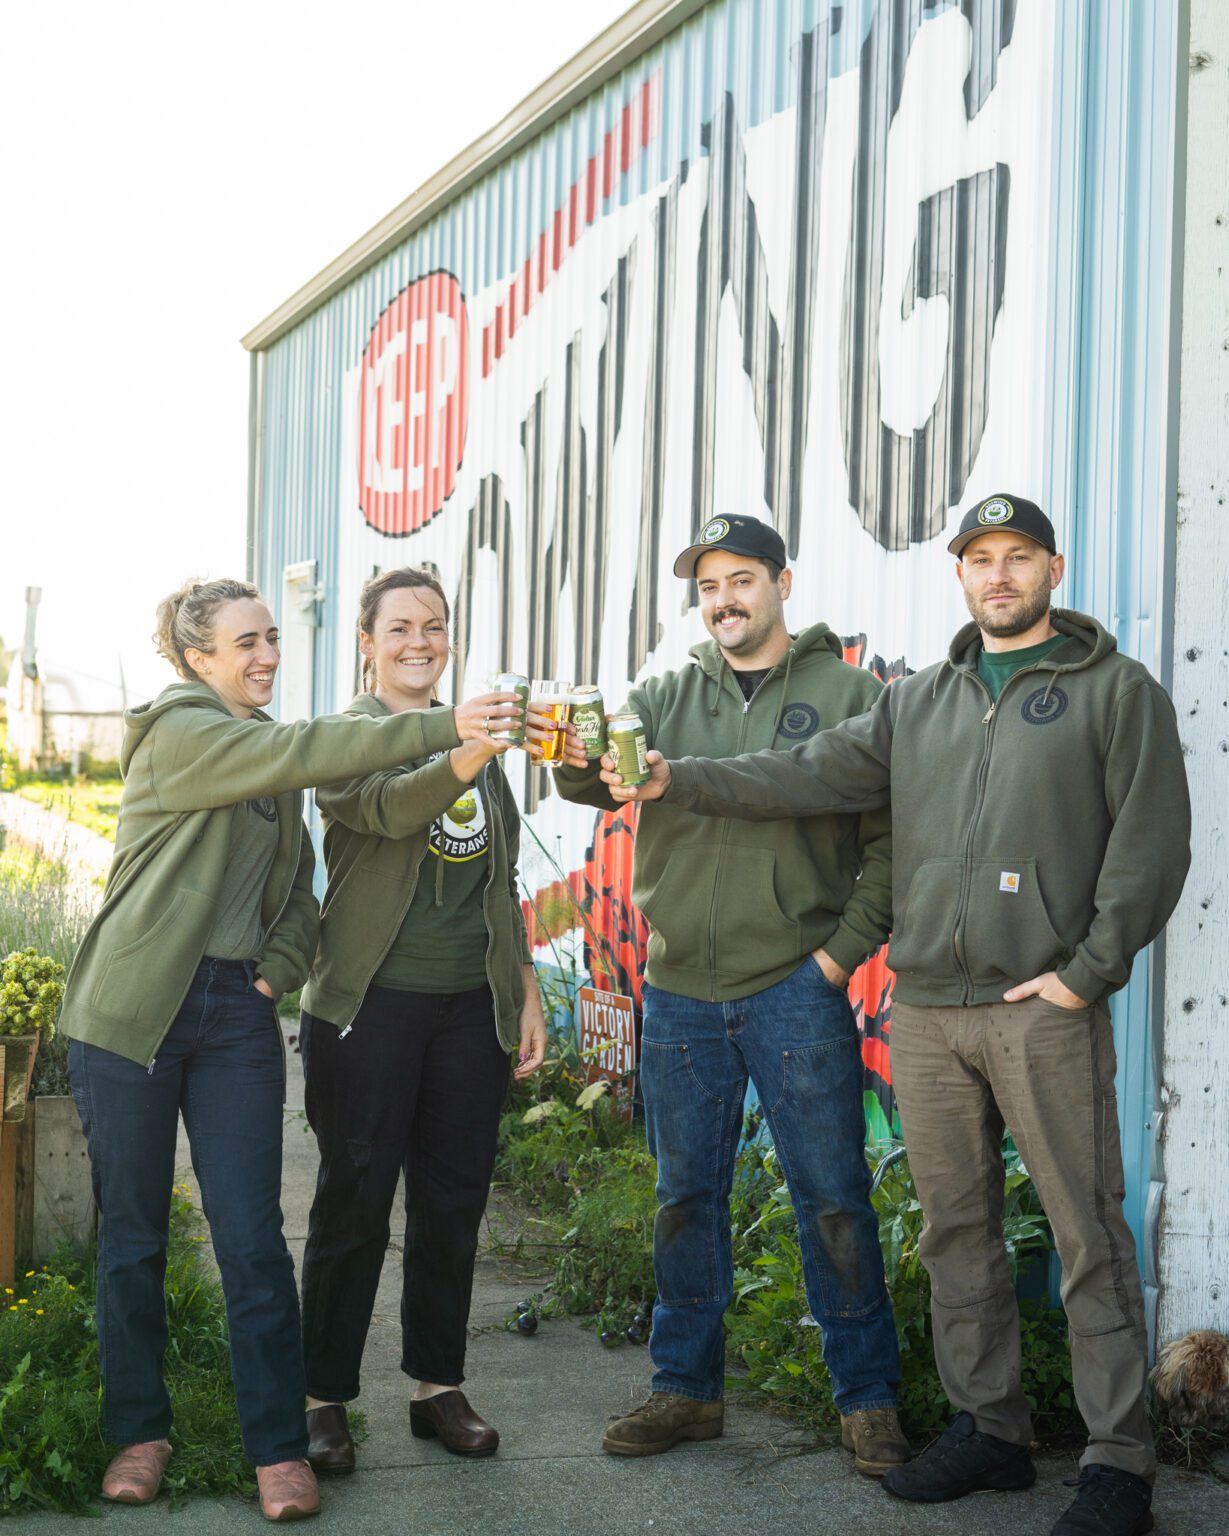 Two of Aslan Brewing's three fresh hop beers this year are made with organic varieties from Growing Veterans in Lynden. One uses organic Chinook hops for its Fresh Hop Kolsch. In addition to the hops from Growing Veterans